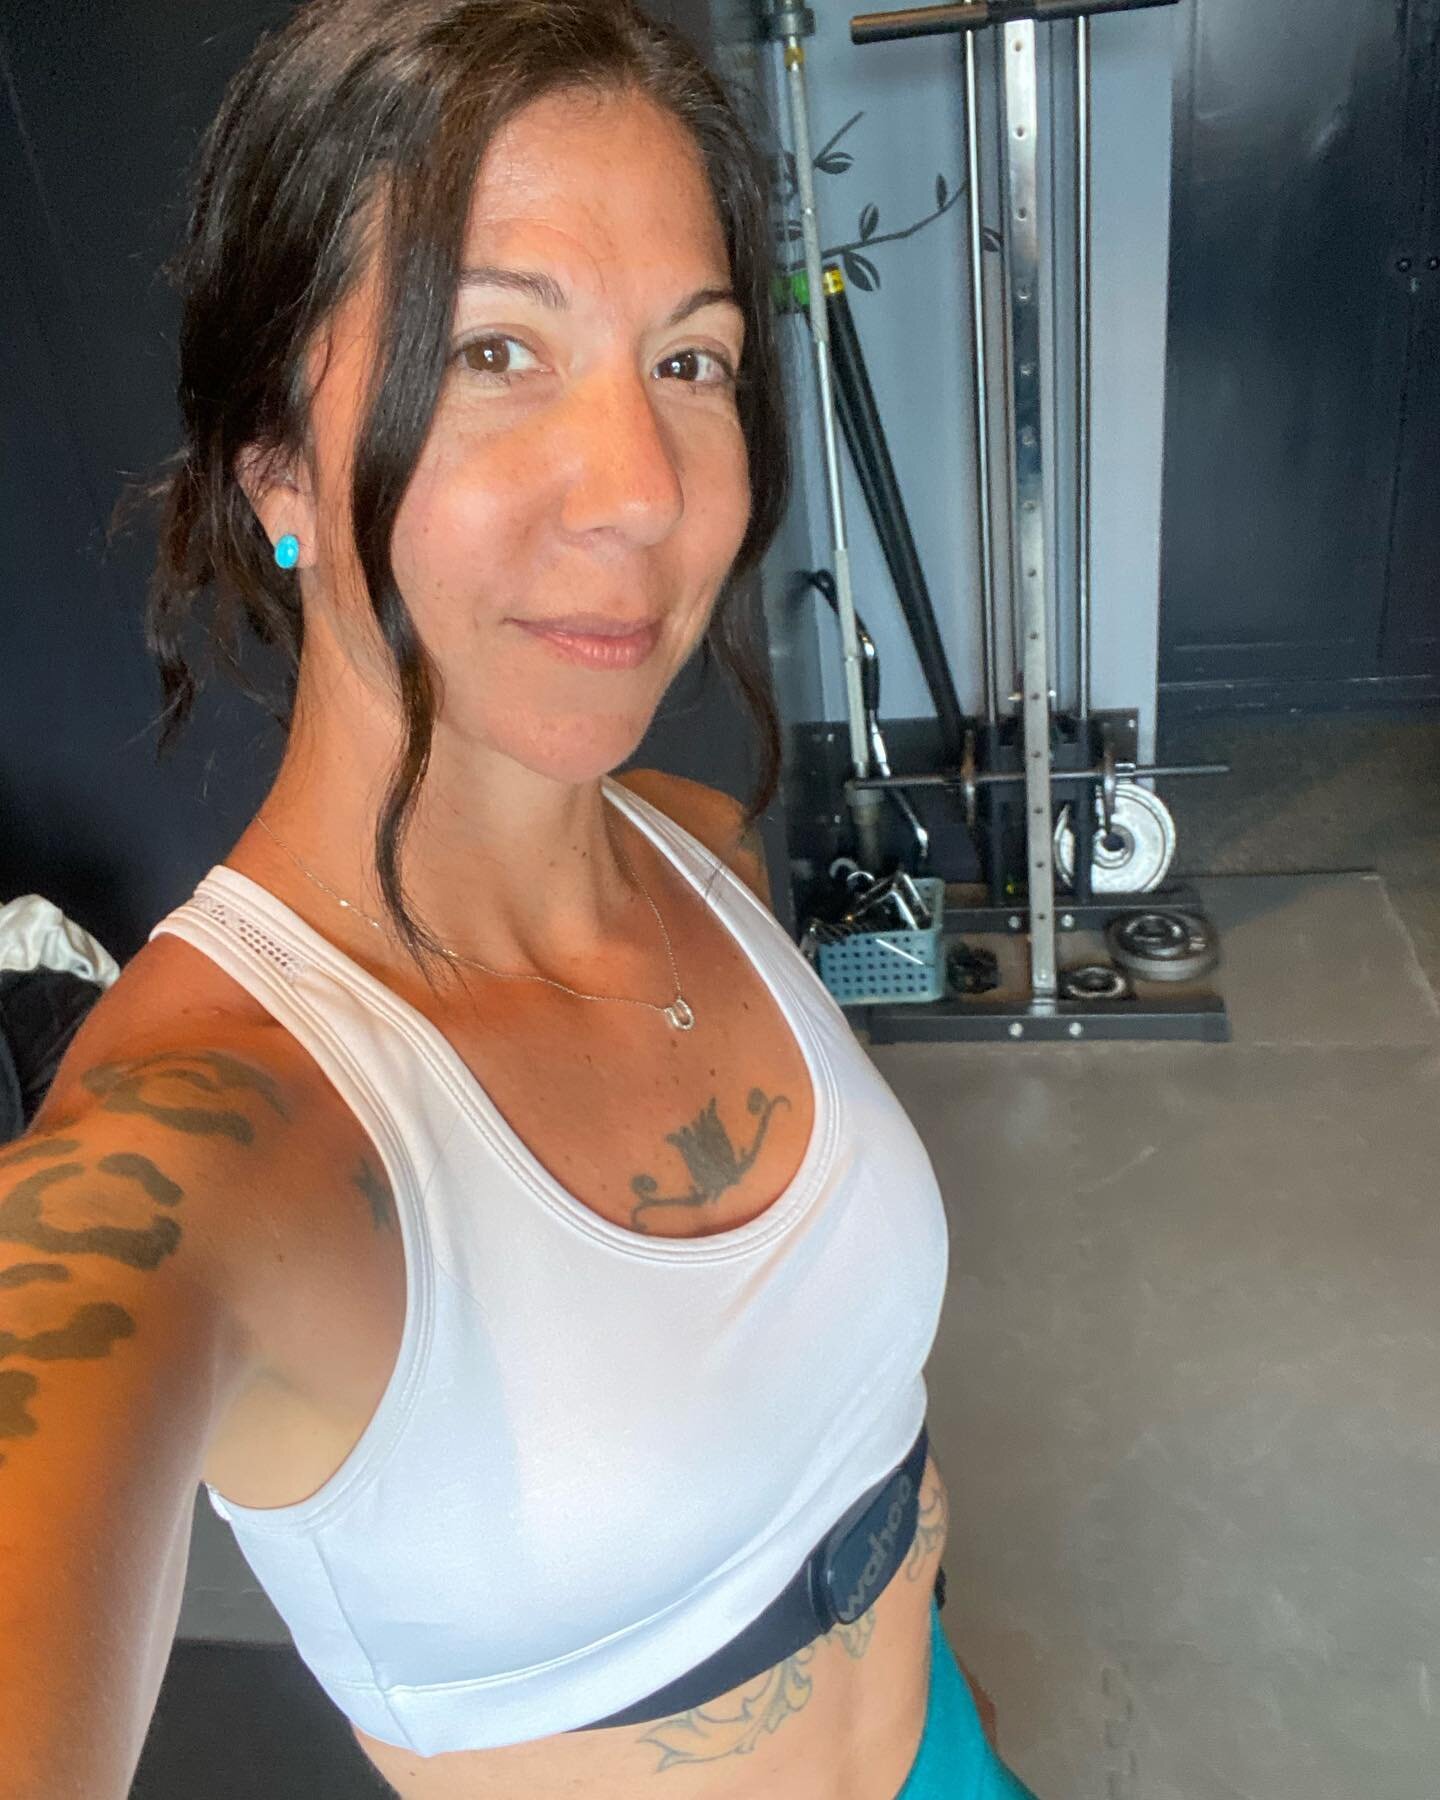 First workout after Cardiac Rehab ❤️&zwj;🩹
I completed Cardiac Rehab a week ago! 36 sessions over the course of 12 weeks. I traveled to Hyannis to attend rehab 3 days a week 🤪 The Cape Cod Cardiac Rehabilitation Center was incredible. I&rsquo;m so 